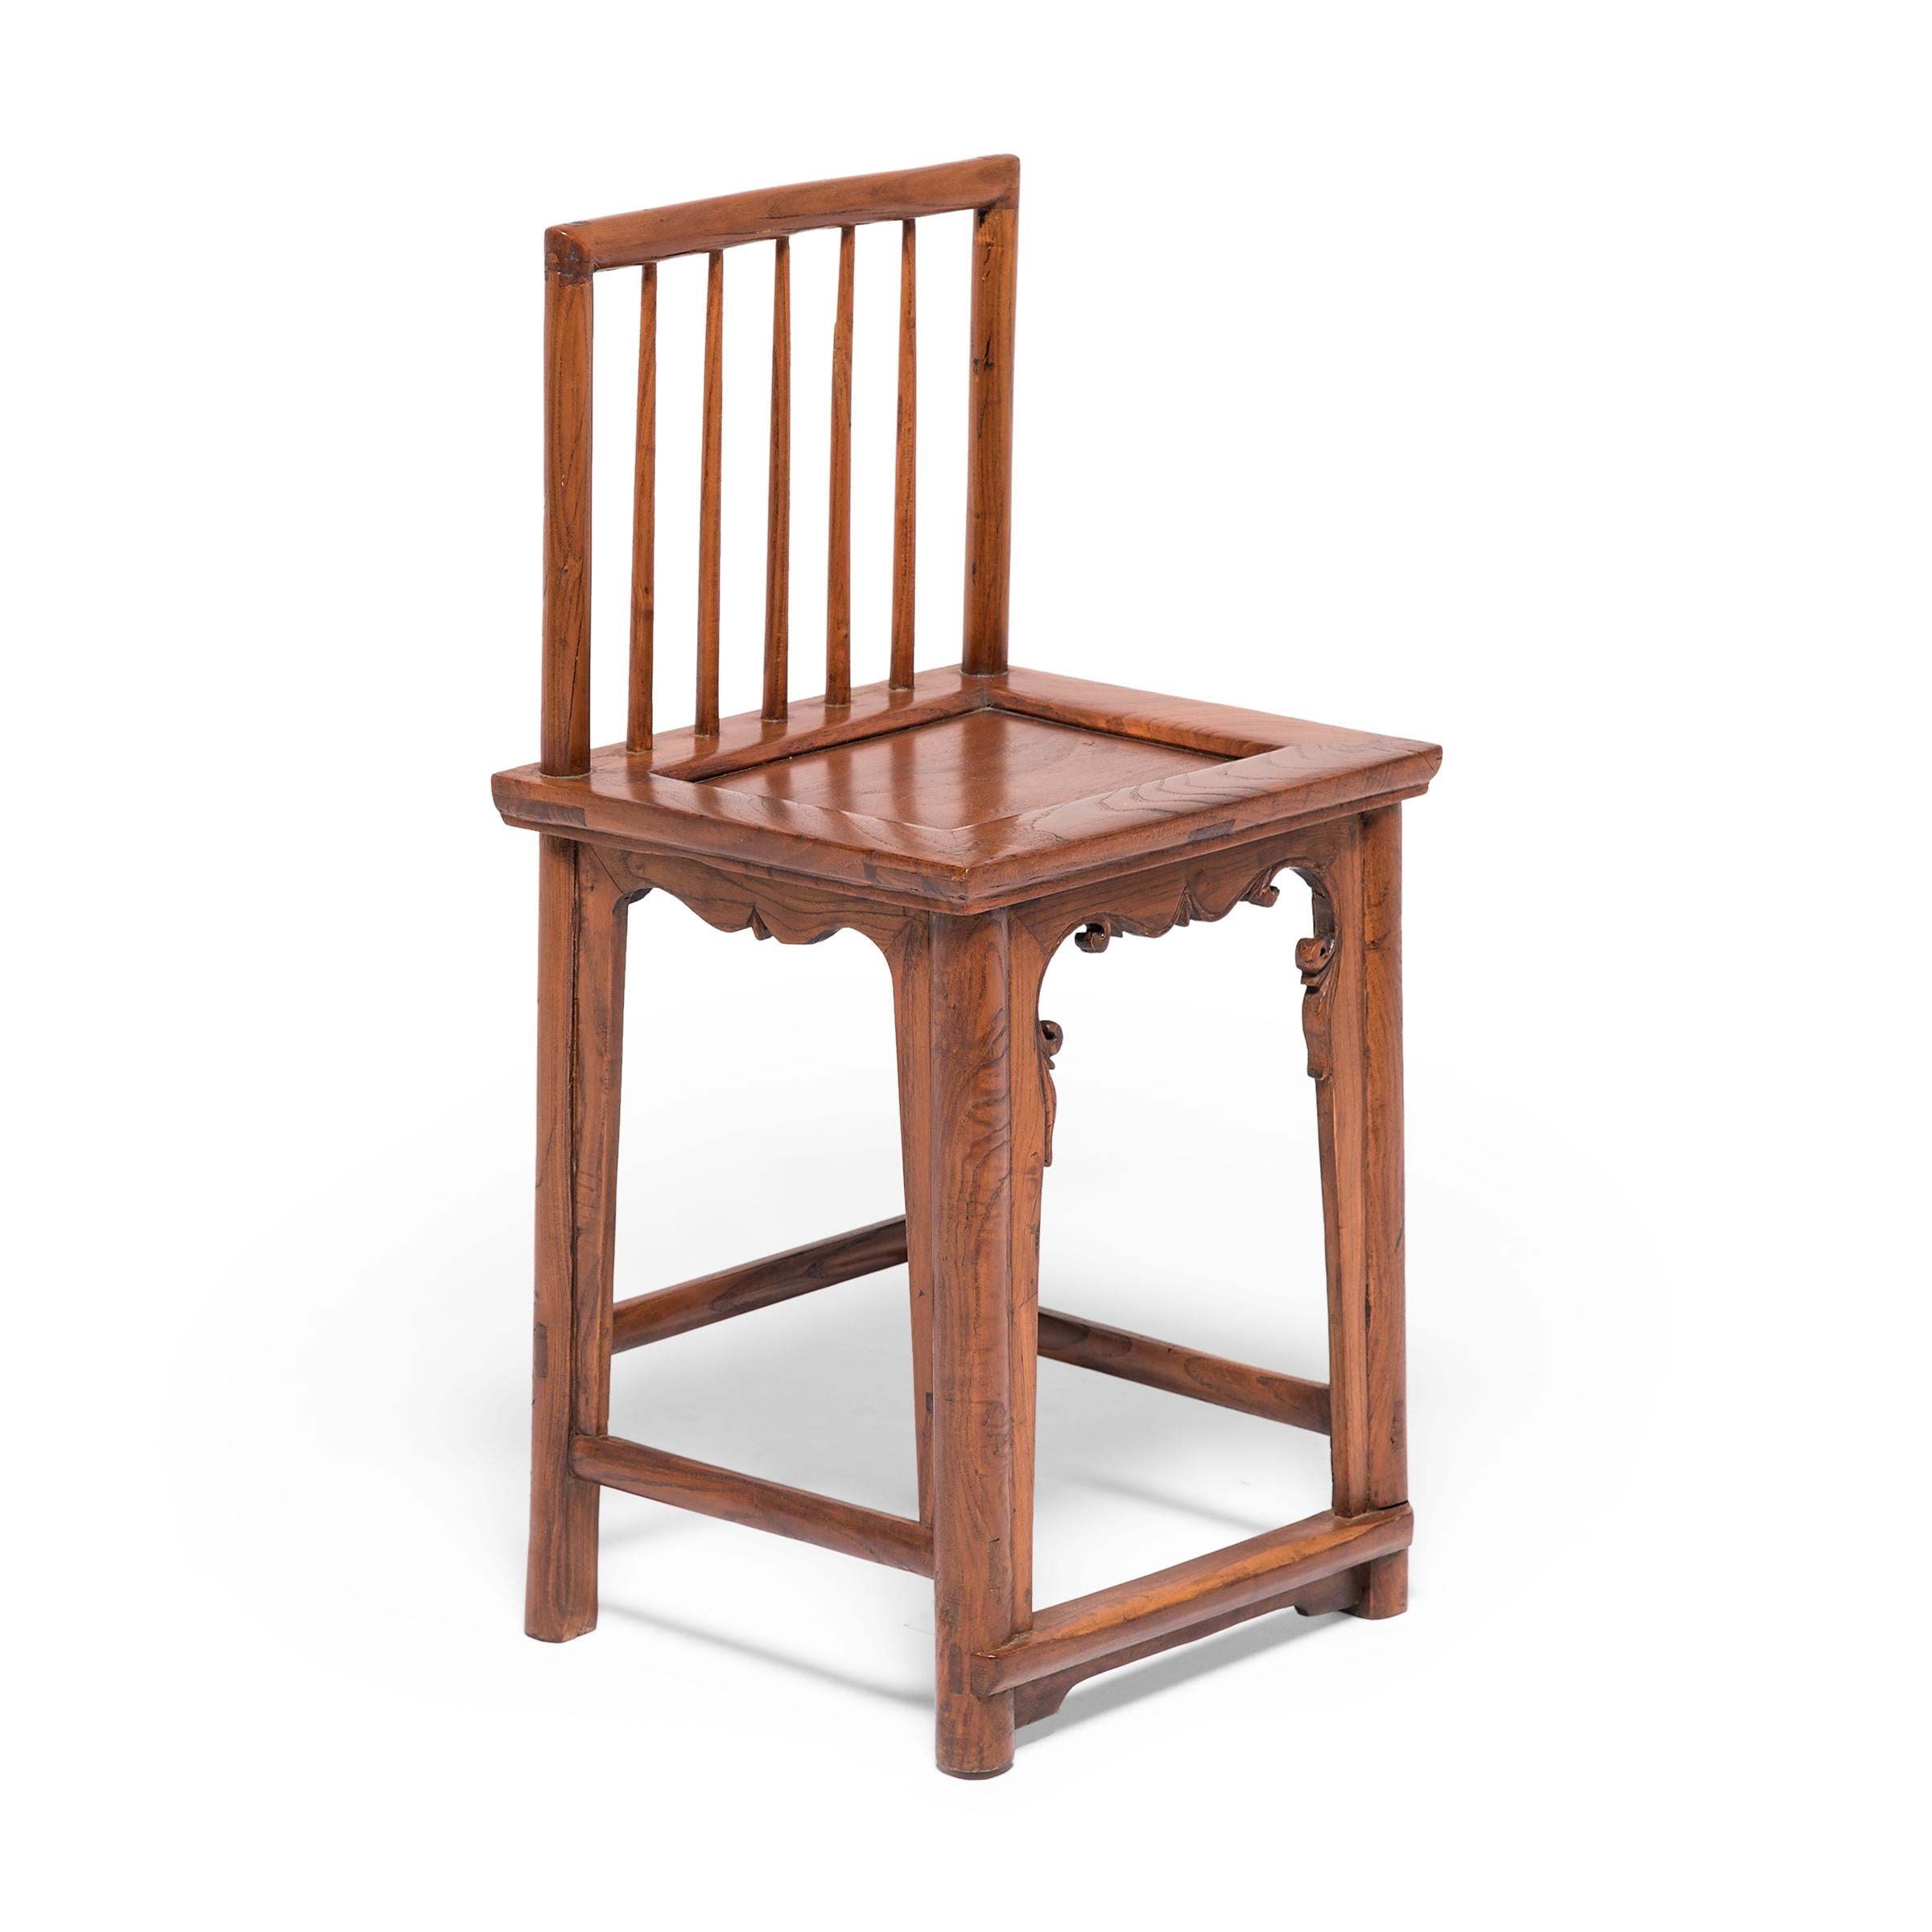 This pair of early 20th century walnut chairs owes its graceful design to the styles and techniques that emerged during the Ming dynasty, the golden age of Chinese furniture design. The clean lines of the spindleback form are interrupted by carved